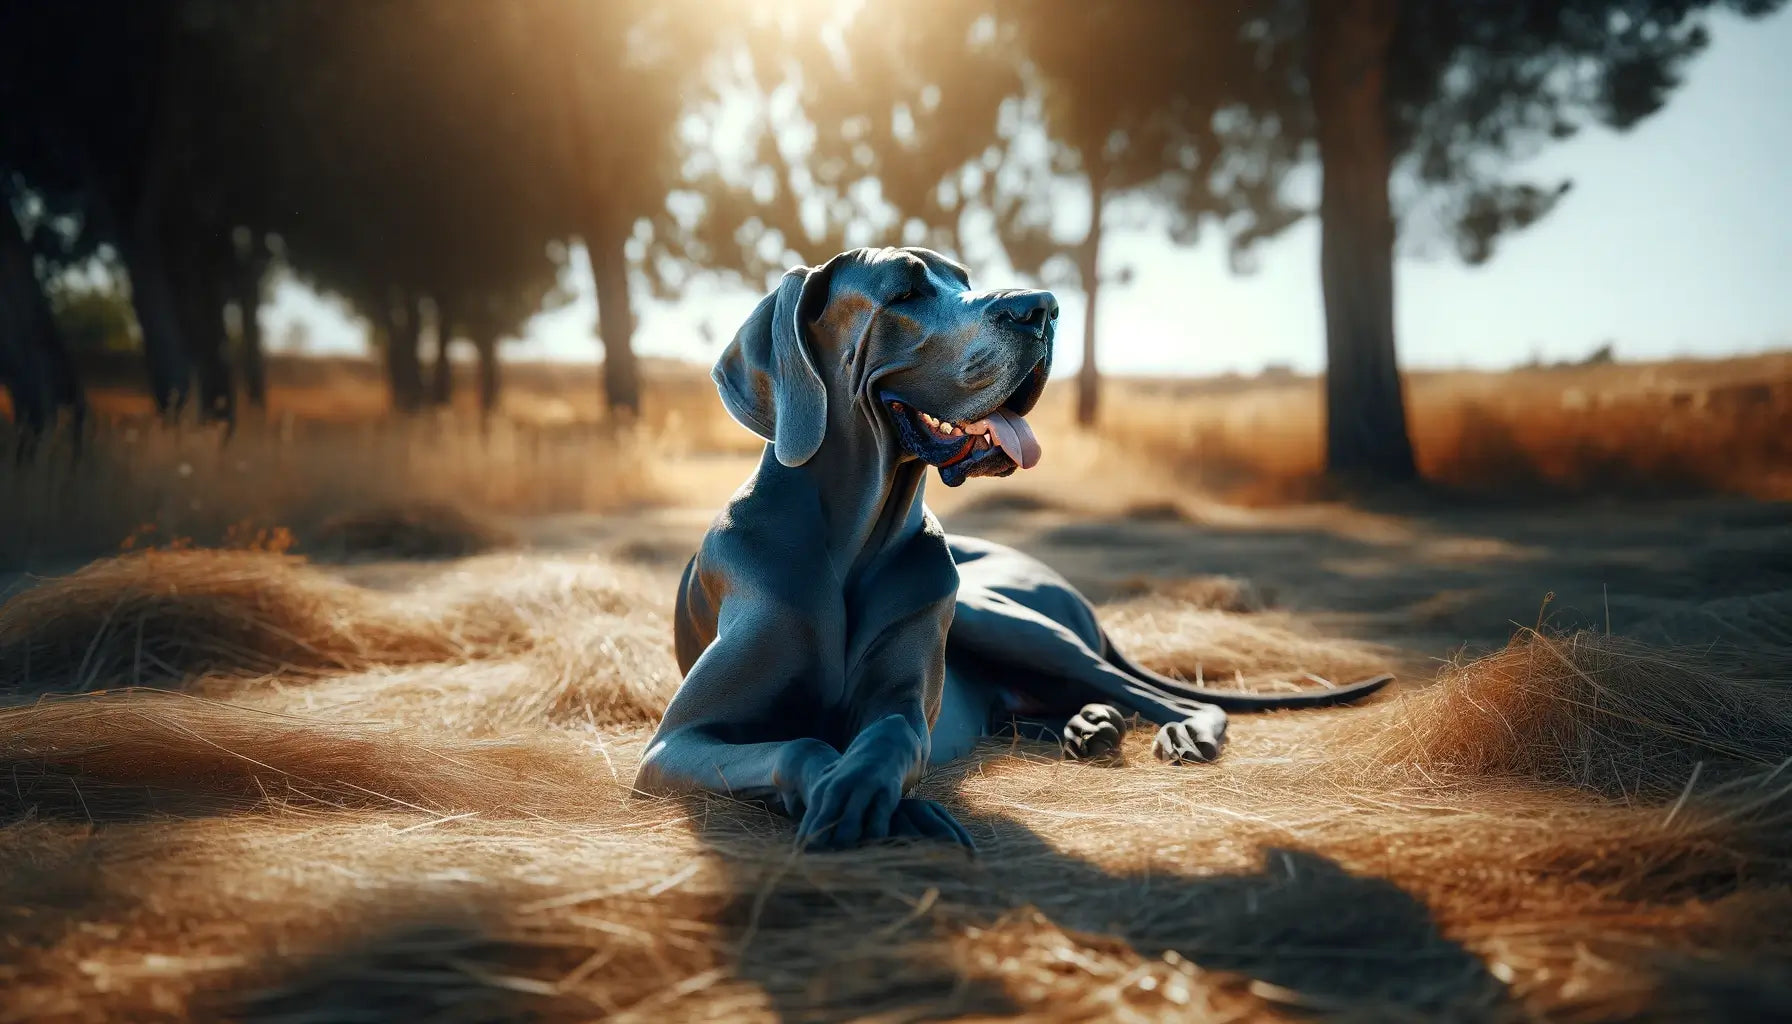 Blue Great Dane lying on dry grass, appearing content and relaxed in an outdoor setting, with its tongue out in a playful or restful pose.